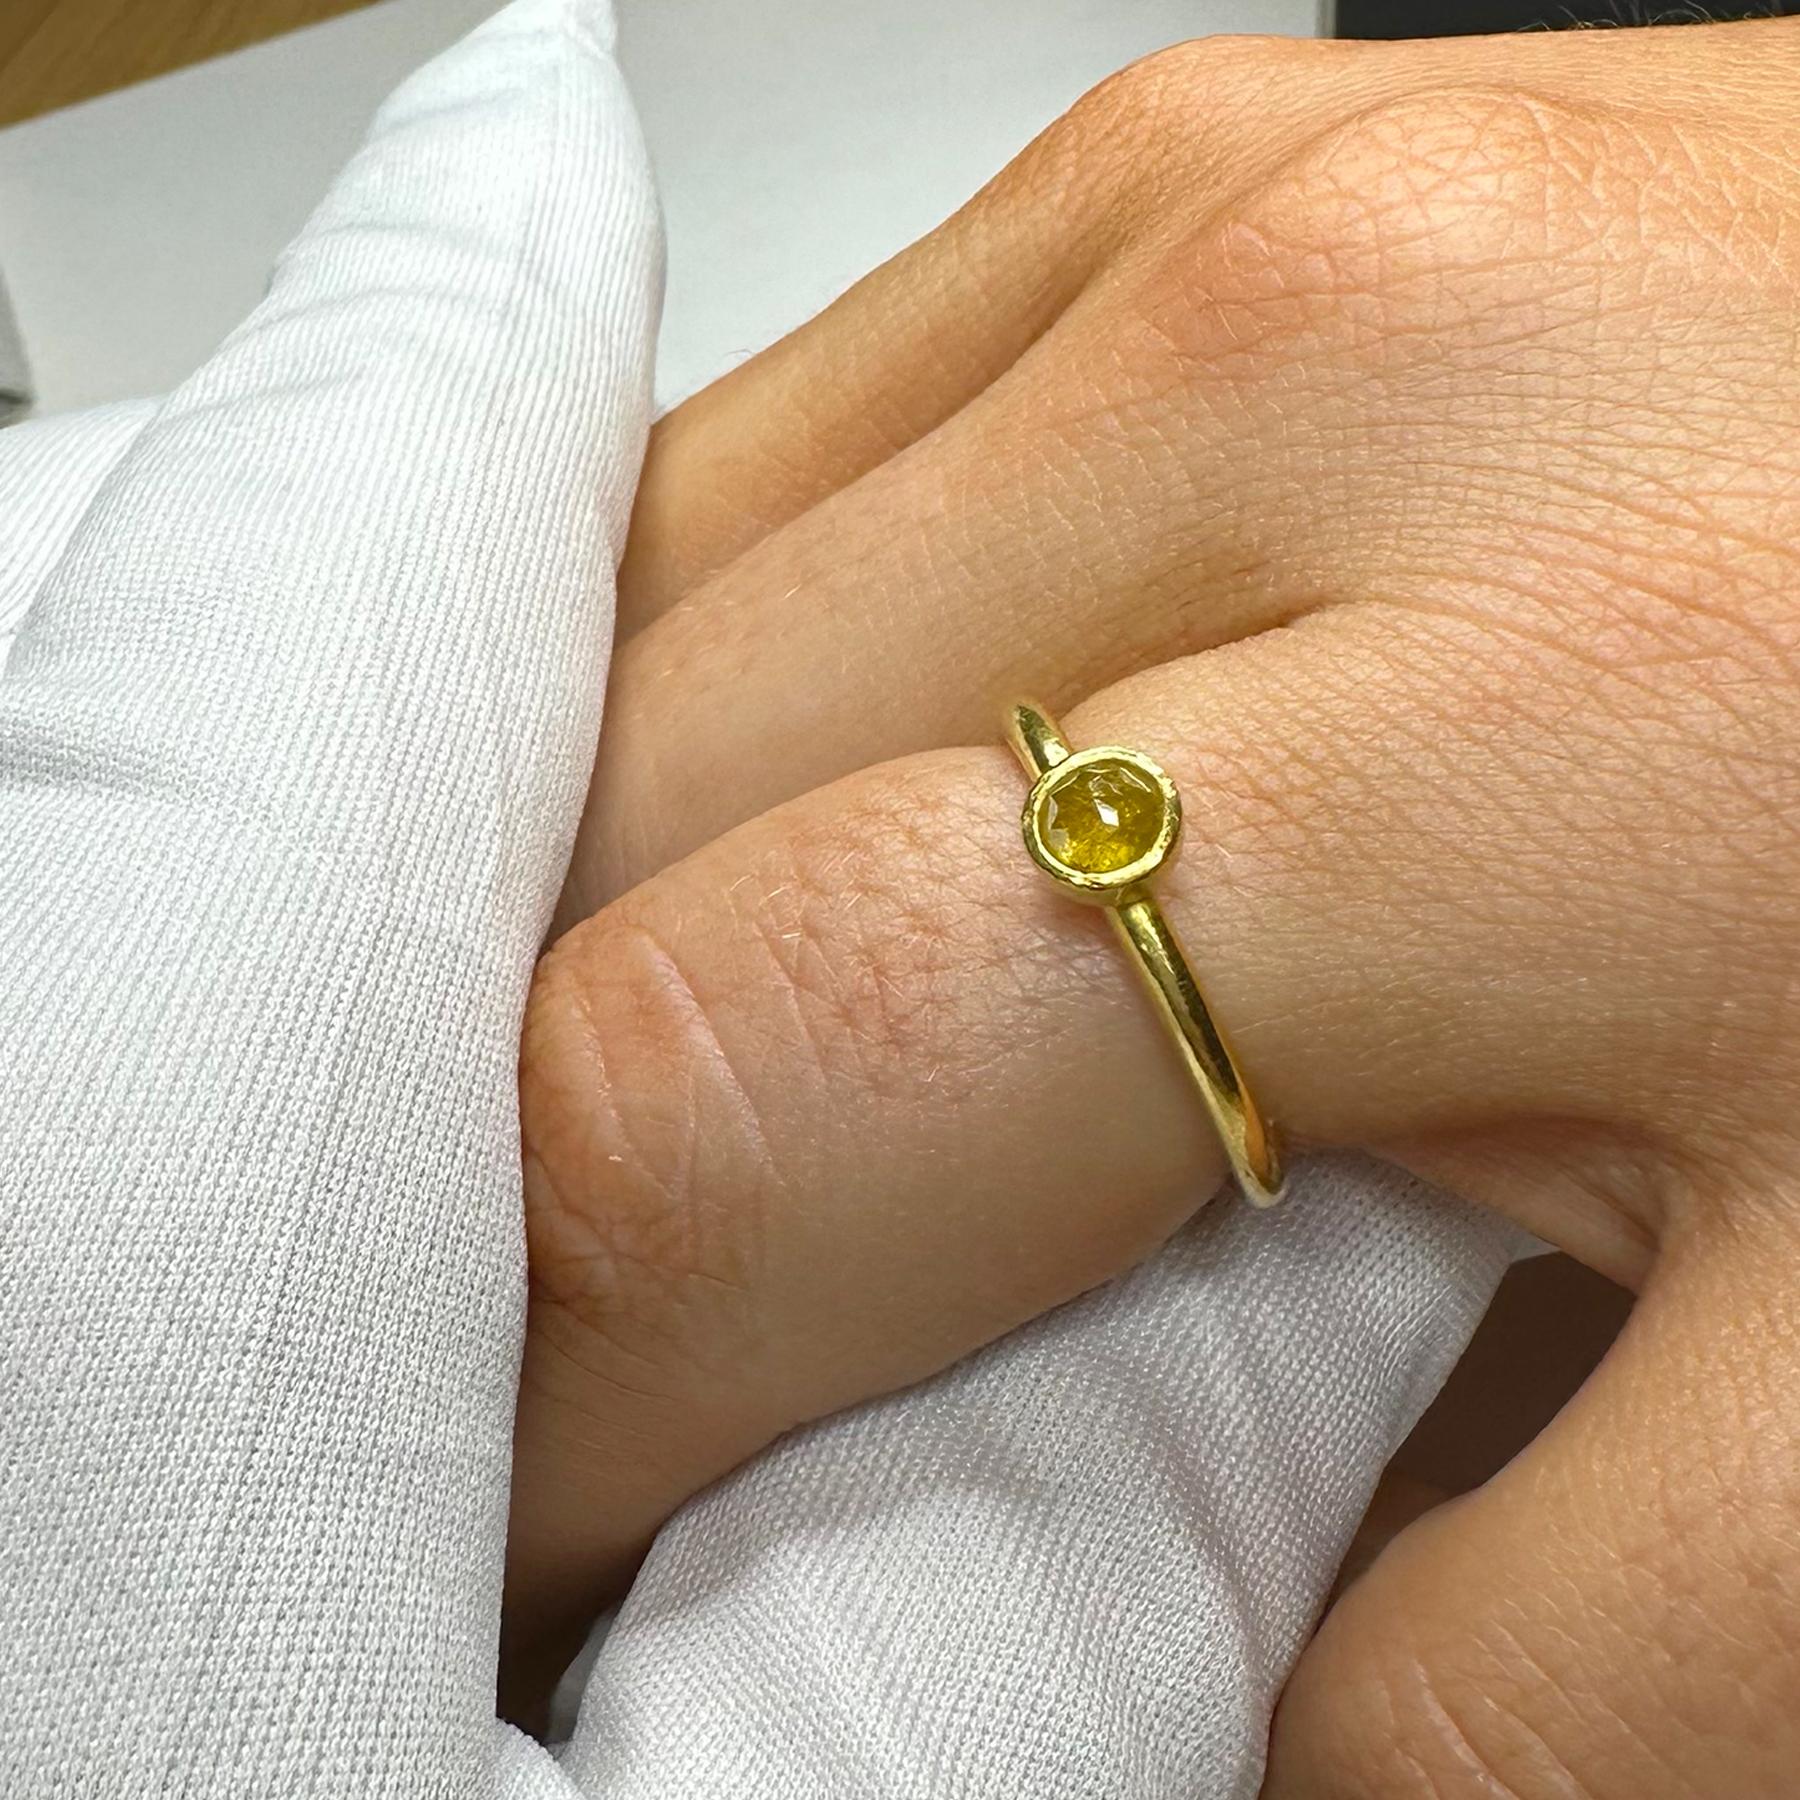 PHILIPPE SPENCER .40 Ct. Yellow Diamond in 22K and 20K Gold Solitaire Ring In New Condition For Sale In Key West, FL